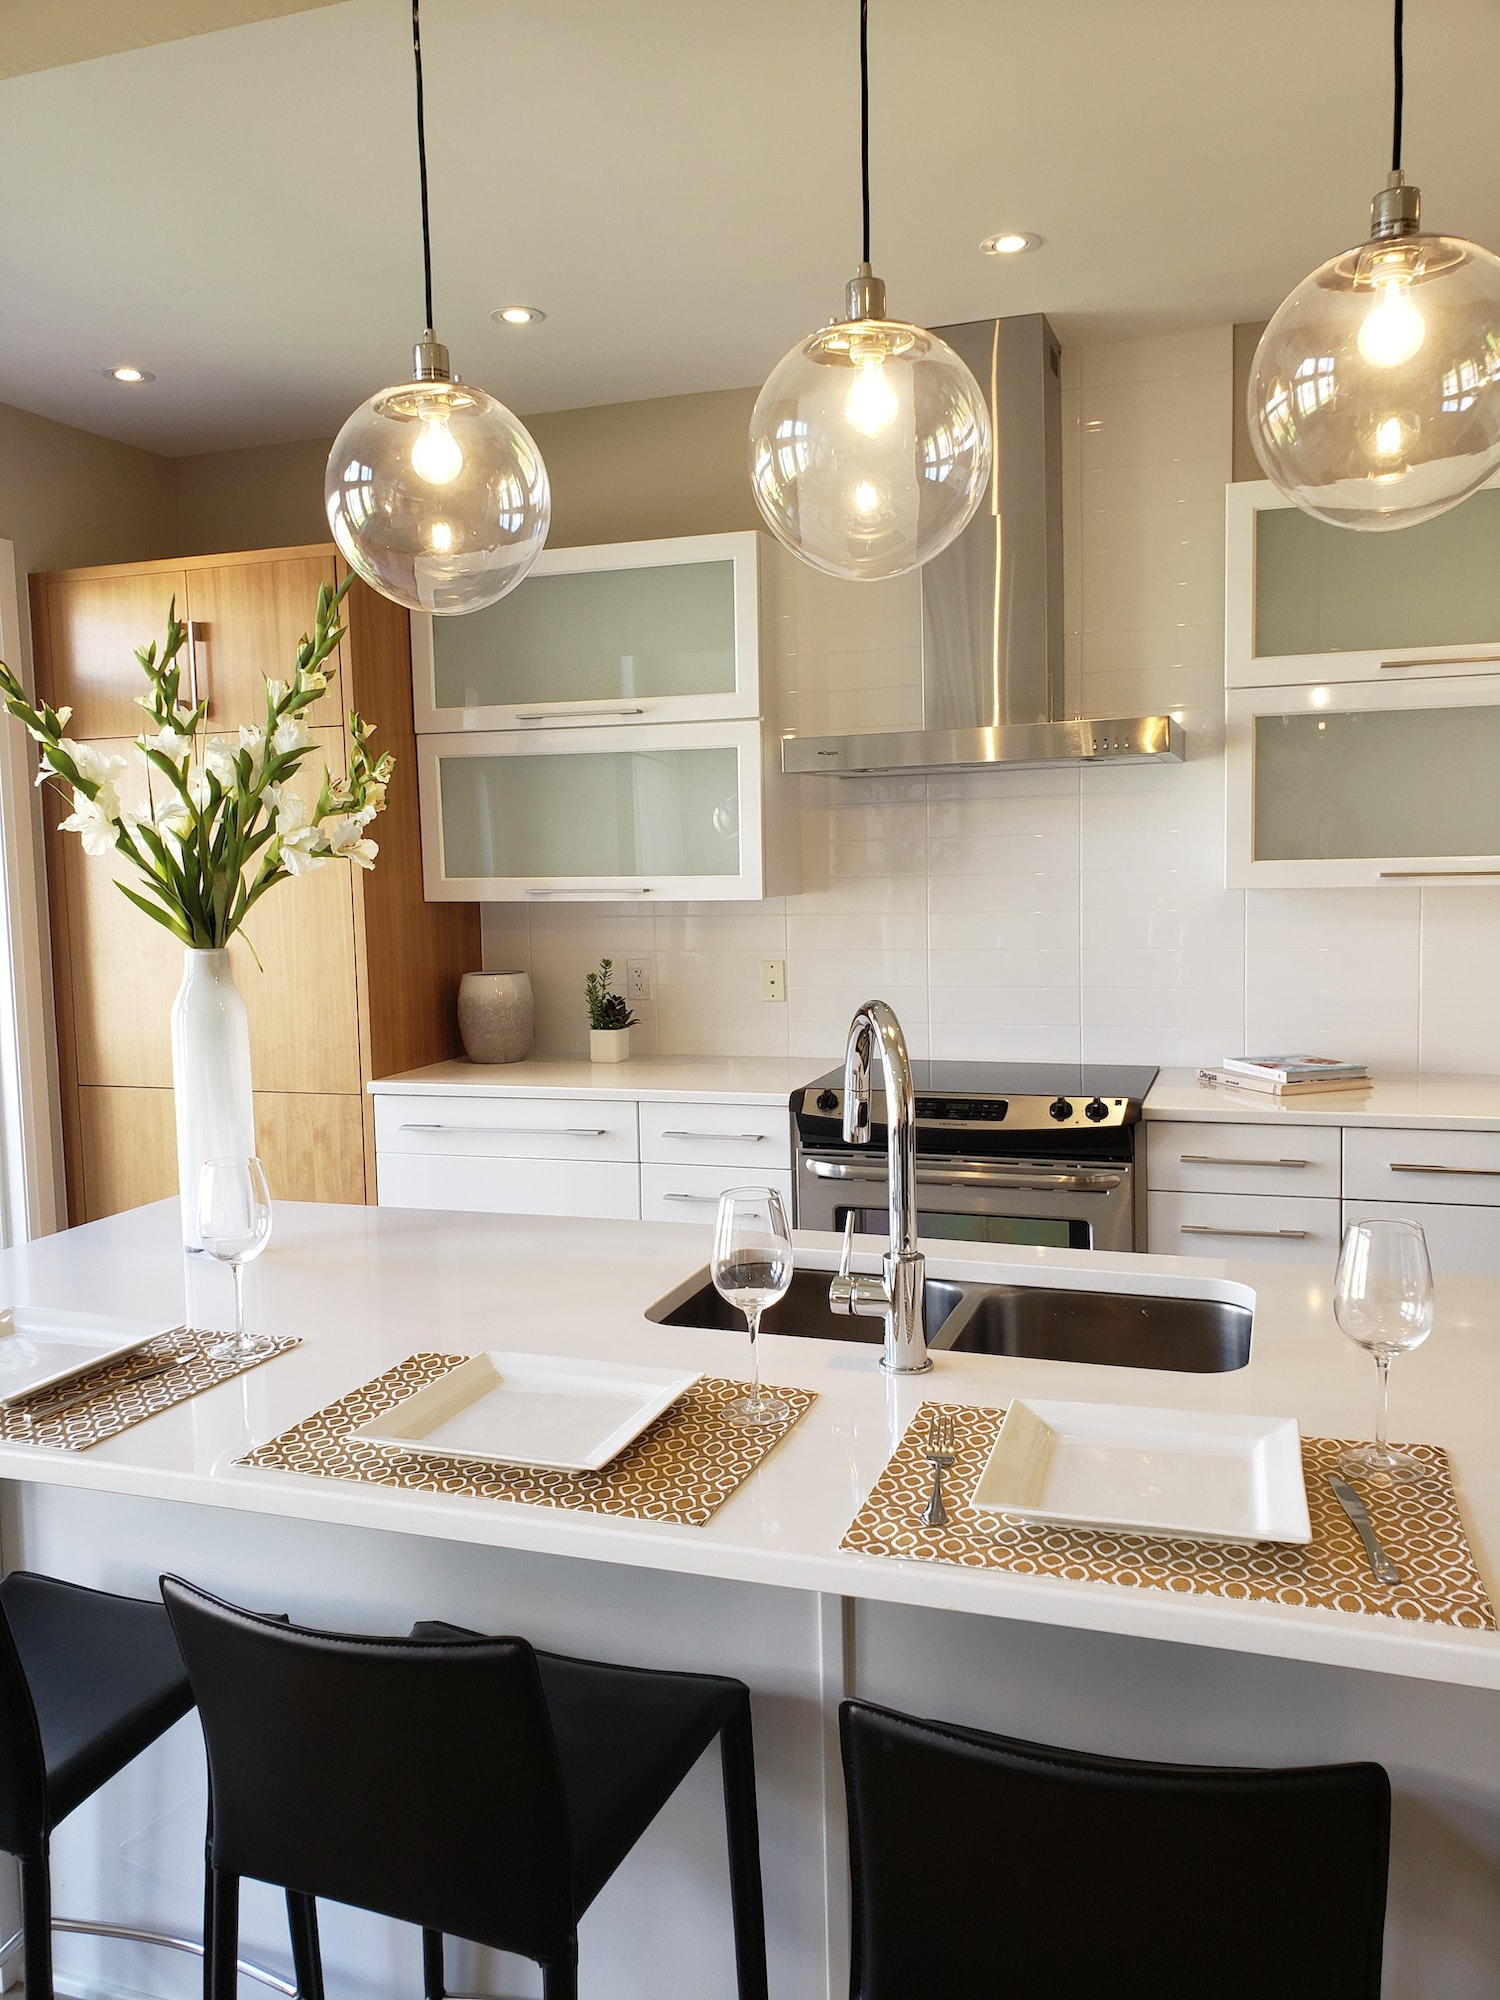 Remodeled kitchen in natural tones, modern apartment design, interior in light colors, eco-friendly